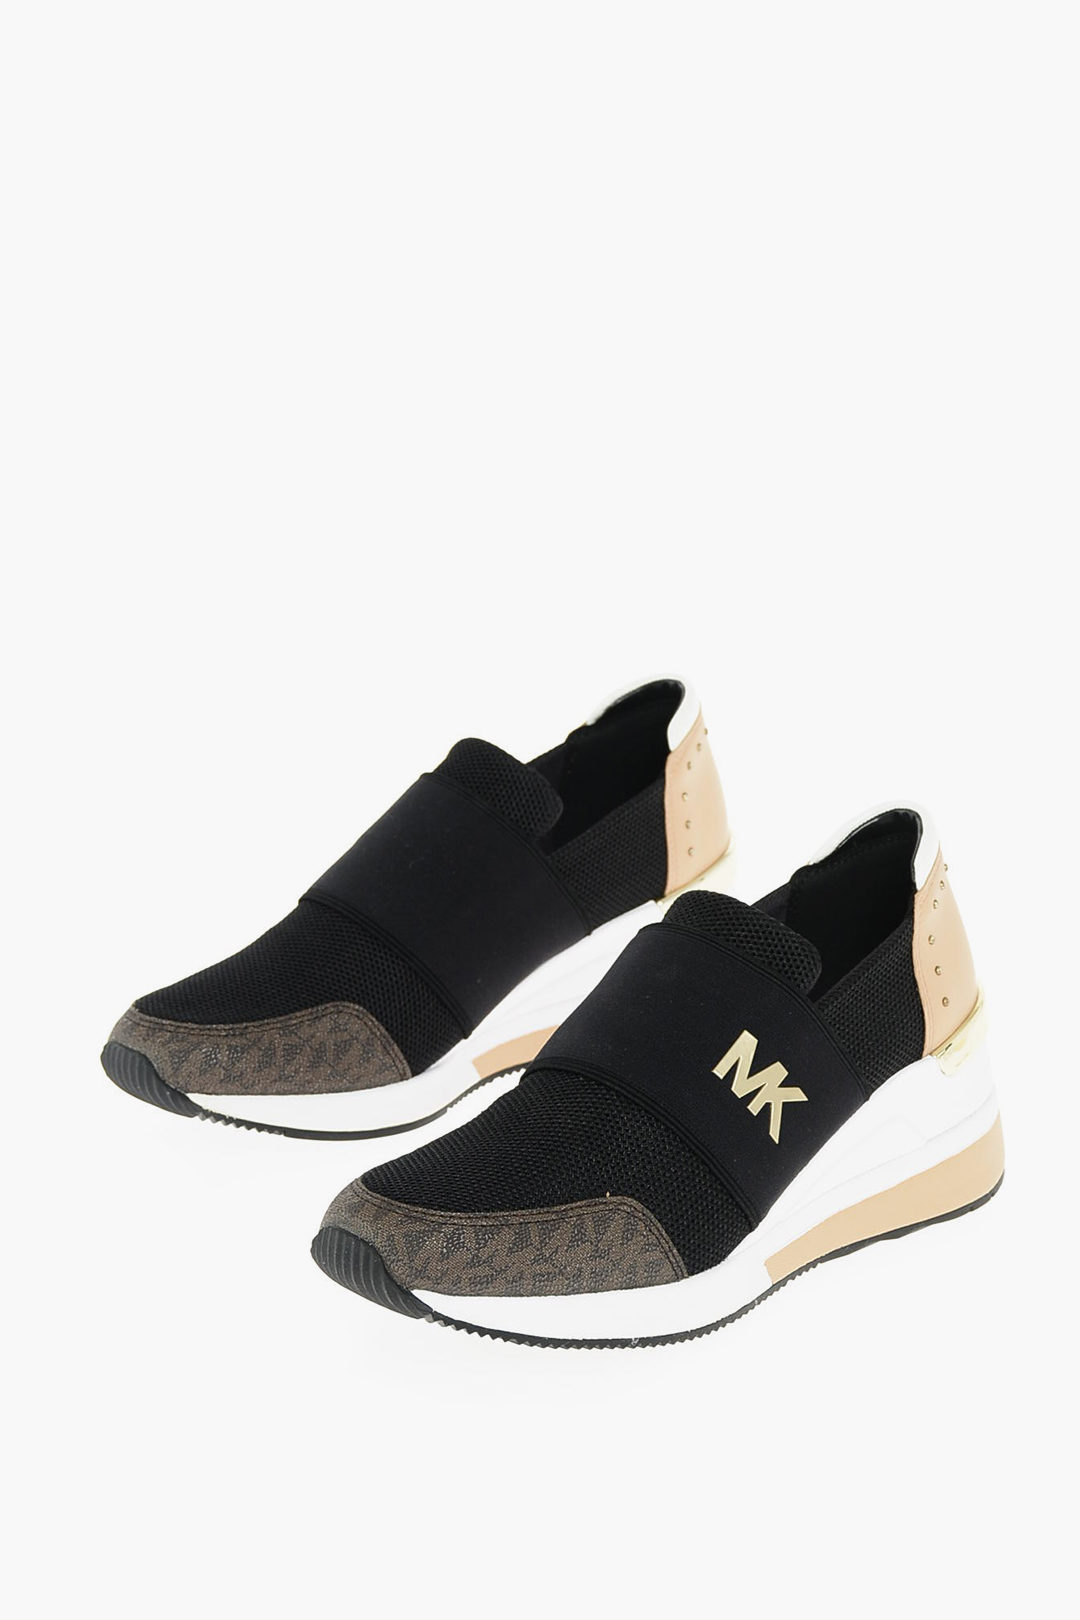 Michael Kors Slip On Sneakers with Logo Elastic Band and Metallized Details  women - Glamood Outlet